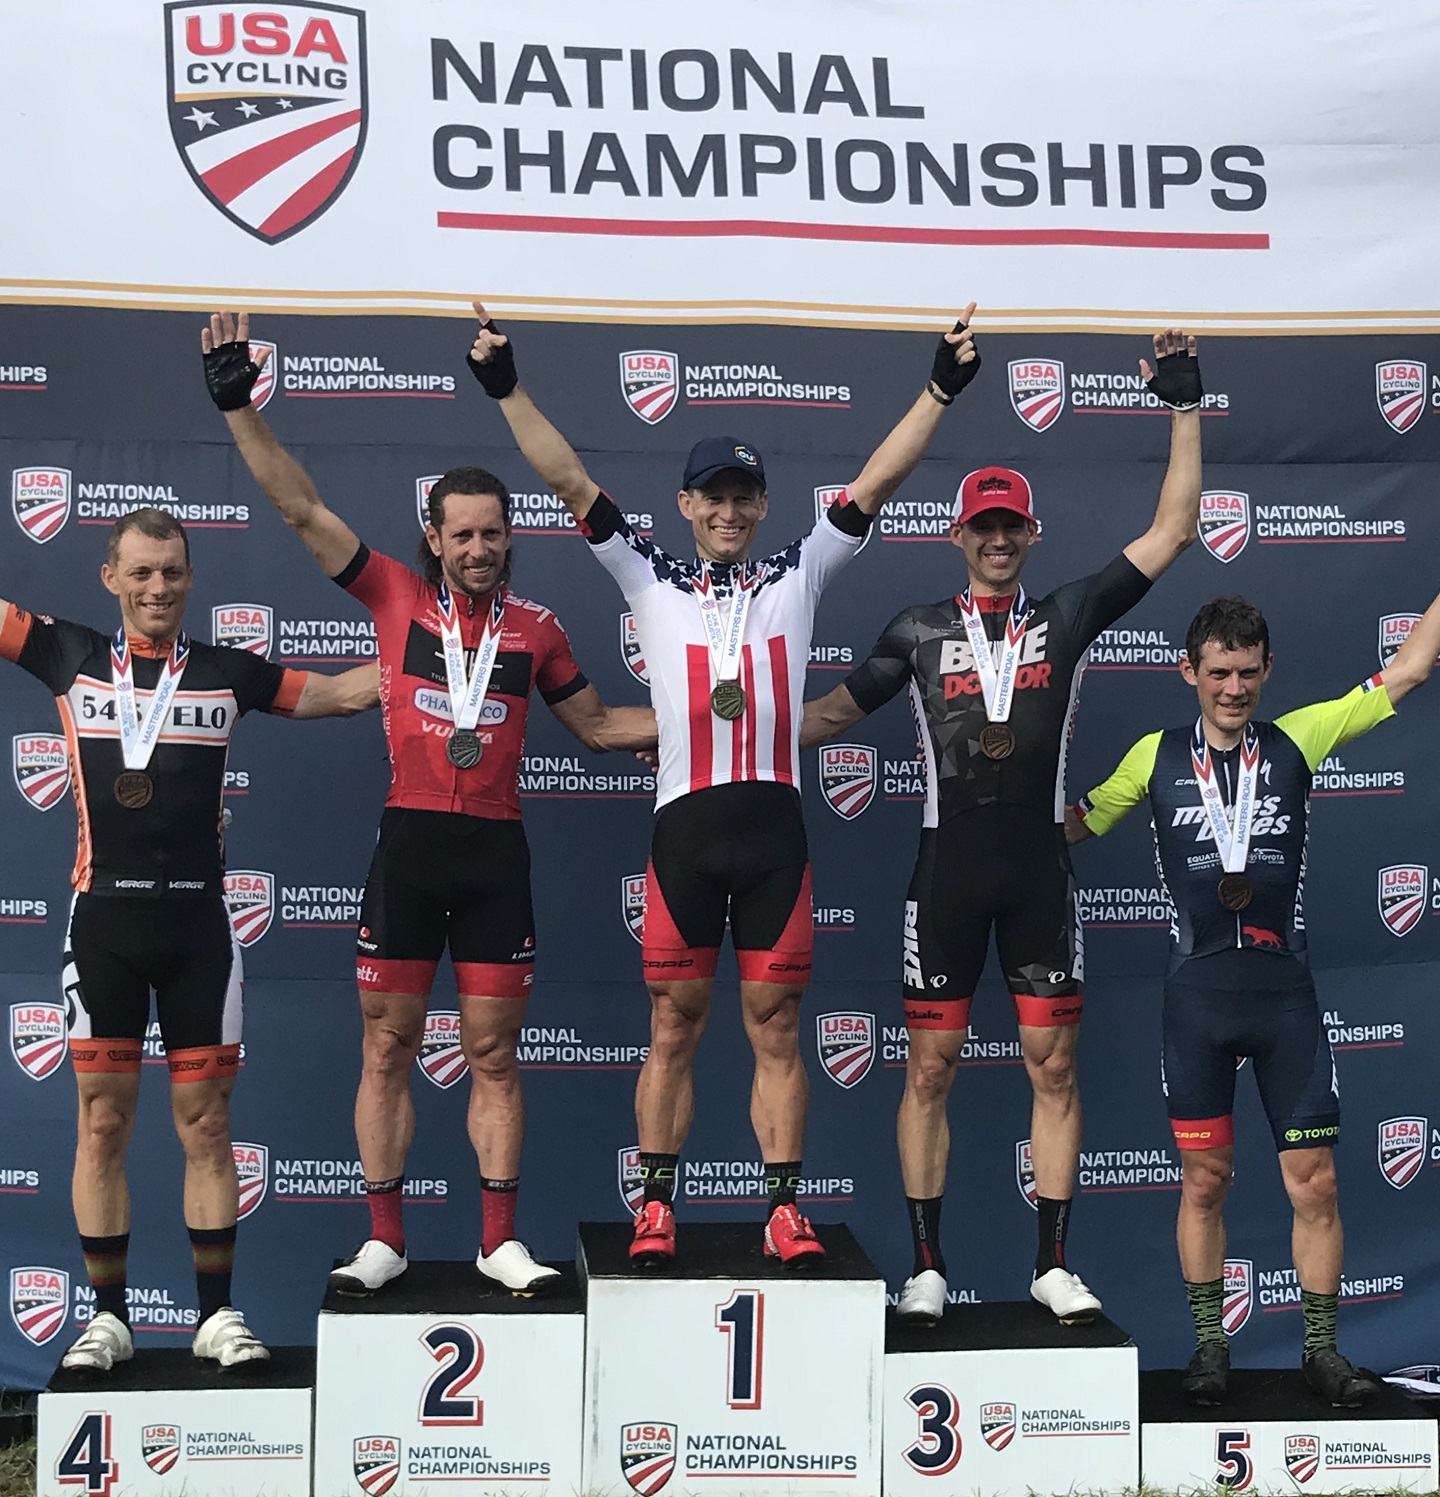 Peet's National Title for Rider Not Named Dan - Brian Zimny EP 71